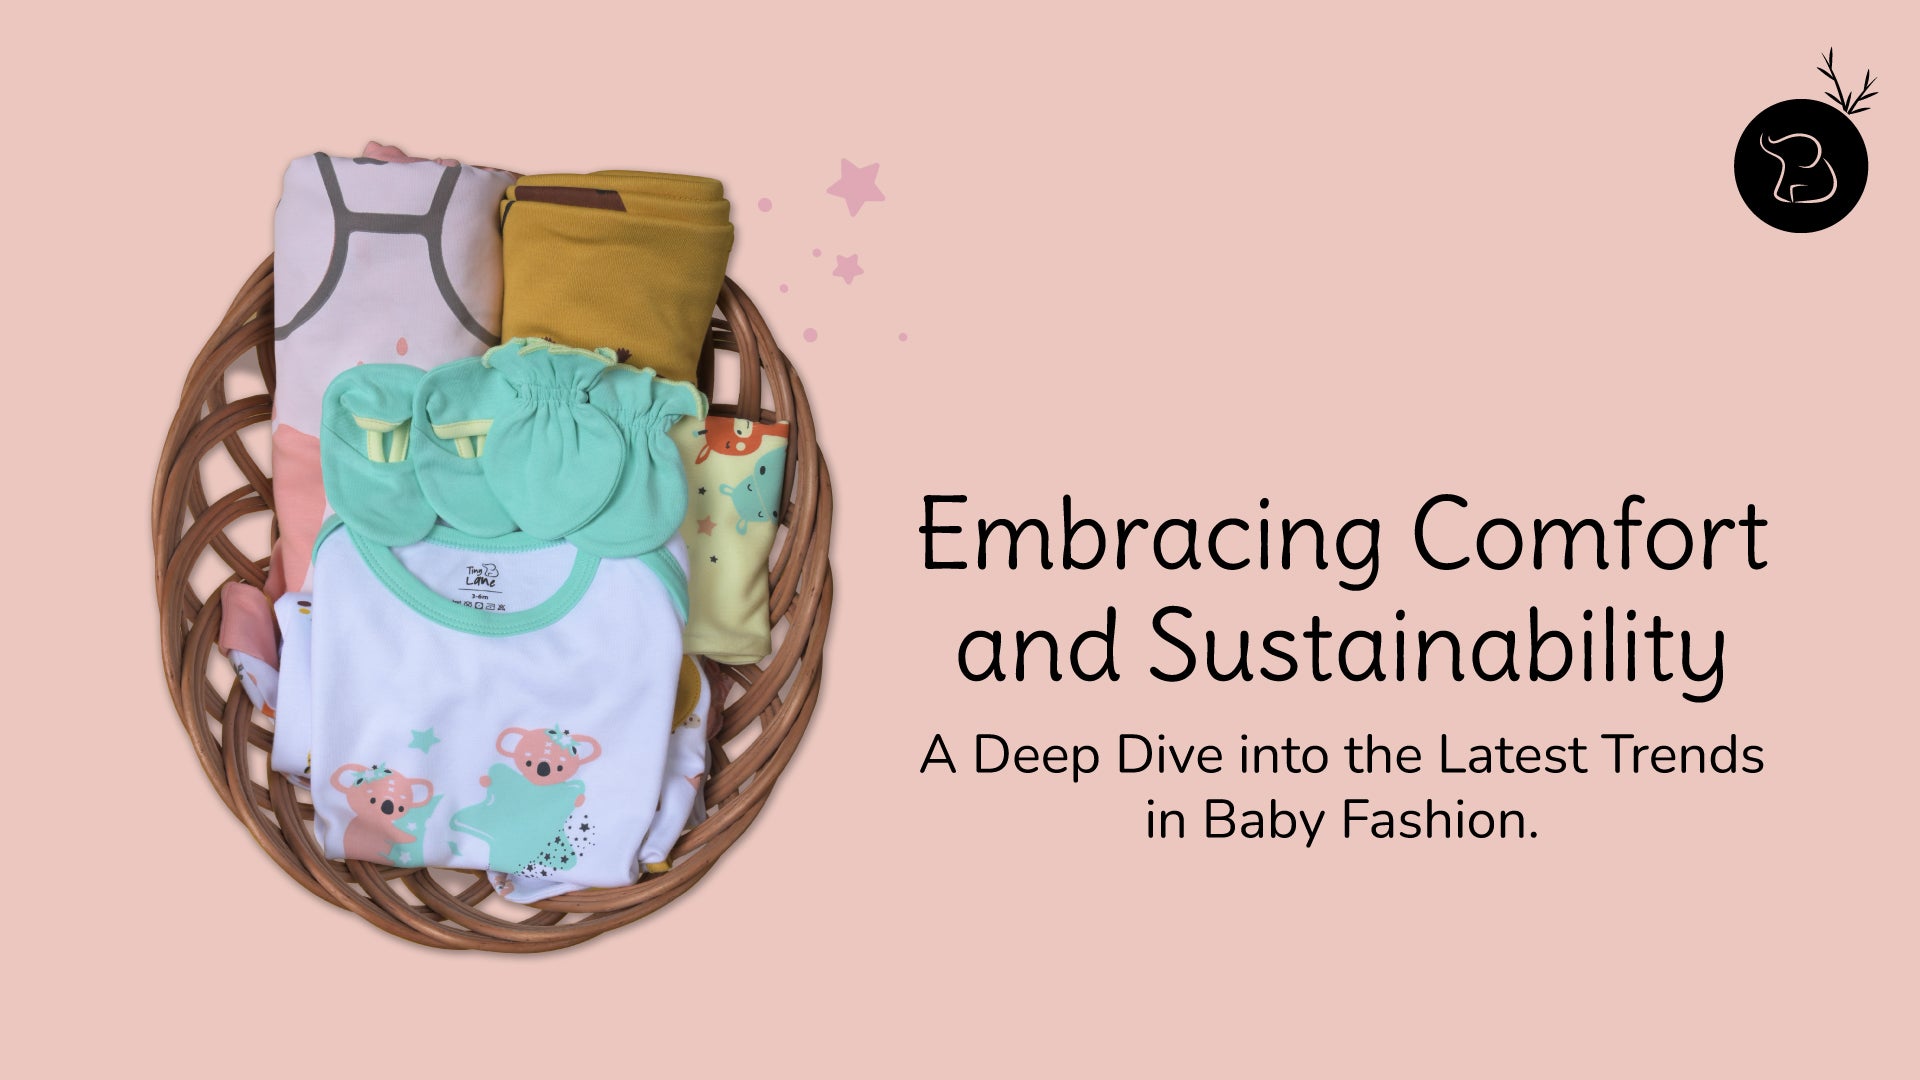 Embracing Comfort and Sustainability: A Deep Dive into the Latest Trends in Baby Fashion